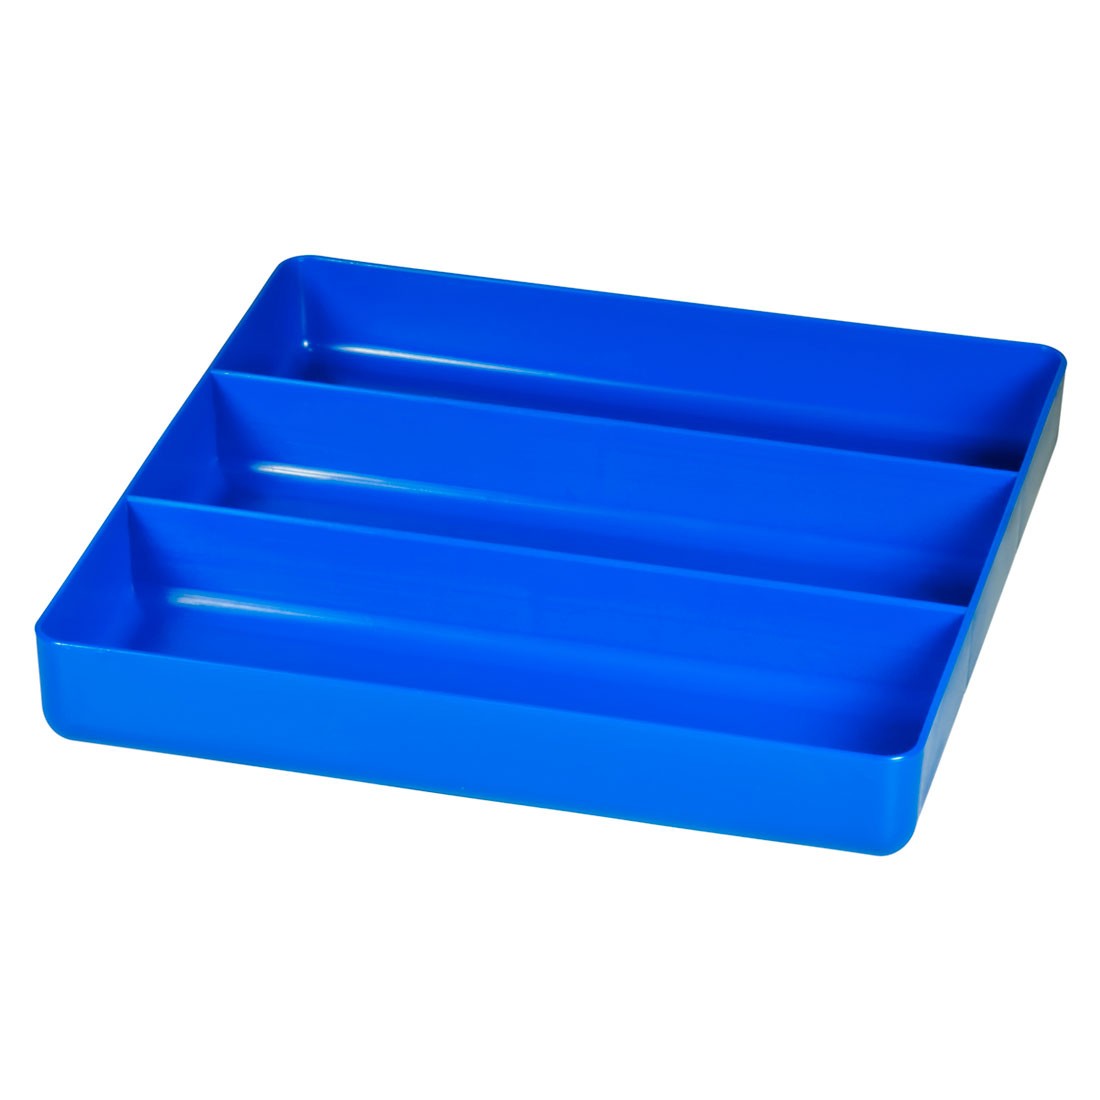 http://www.ernstmfg.com/Shared/Images/Product/5022-Three-Compartment-Organizer-Tray-Blue/5022_three-compartment-organizer-tray_blue-1100_1.jpg